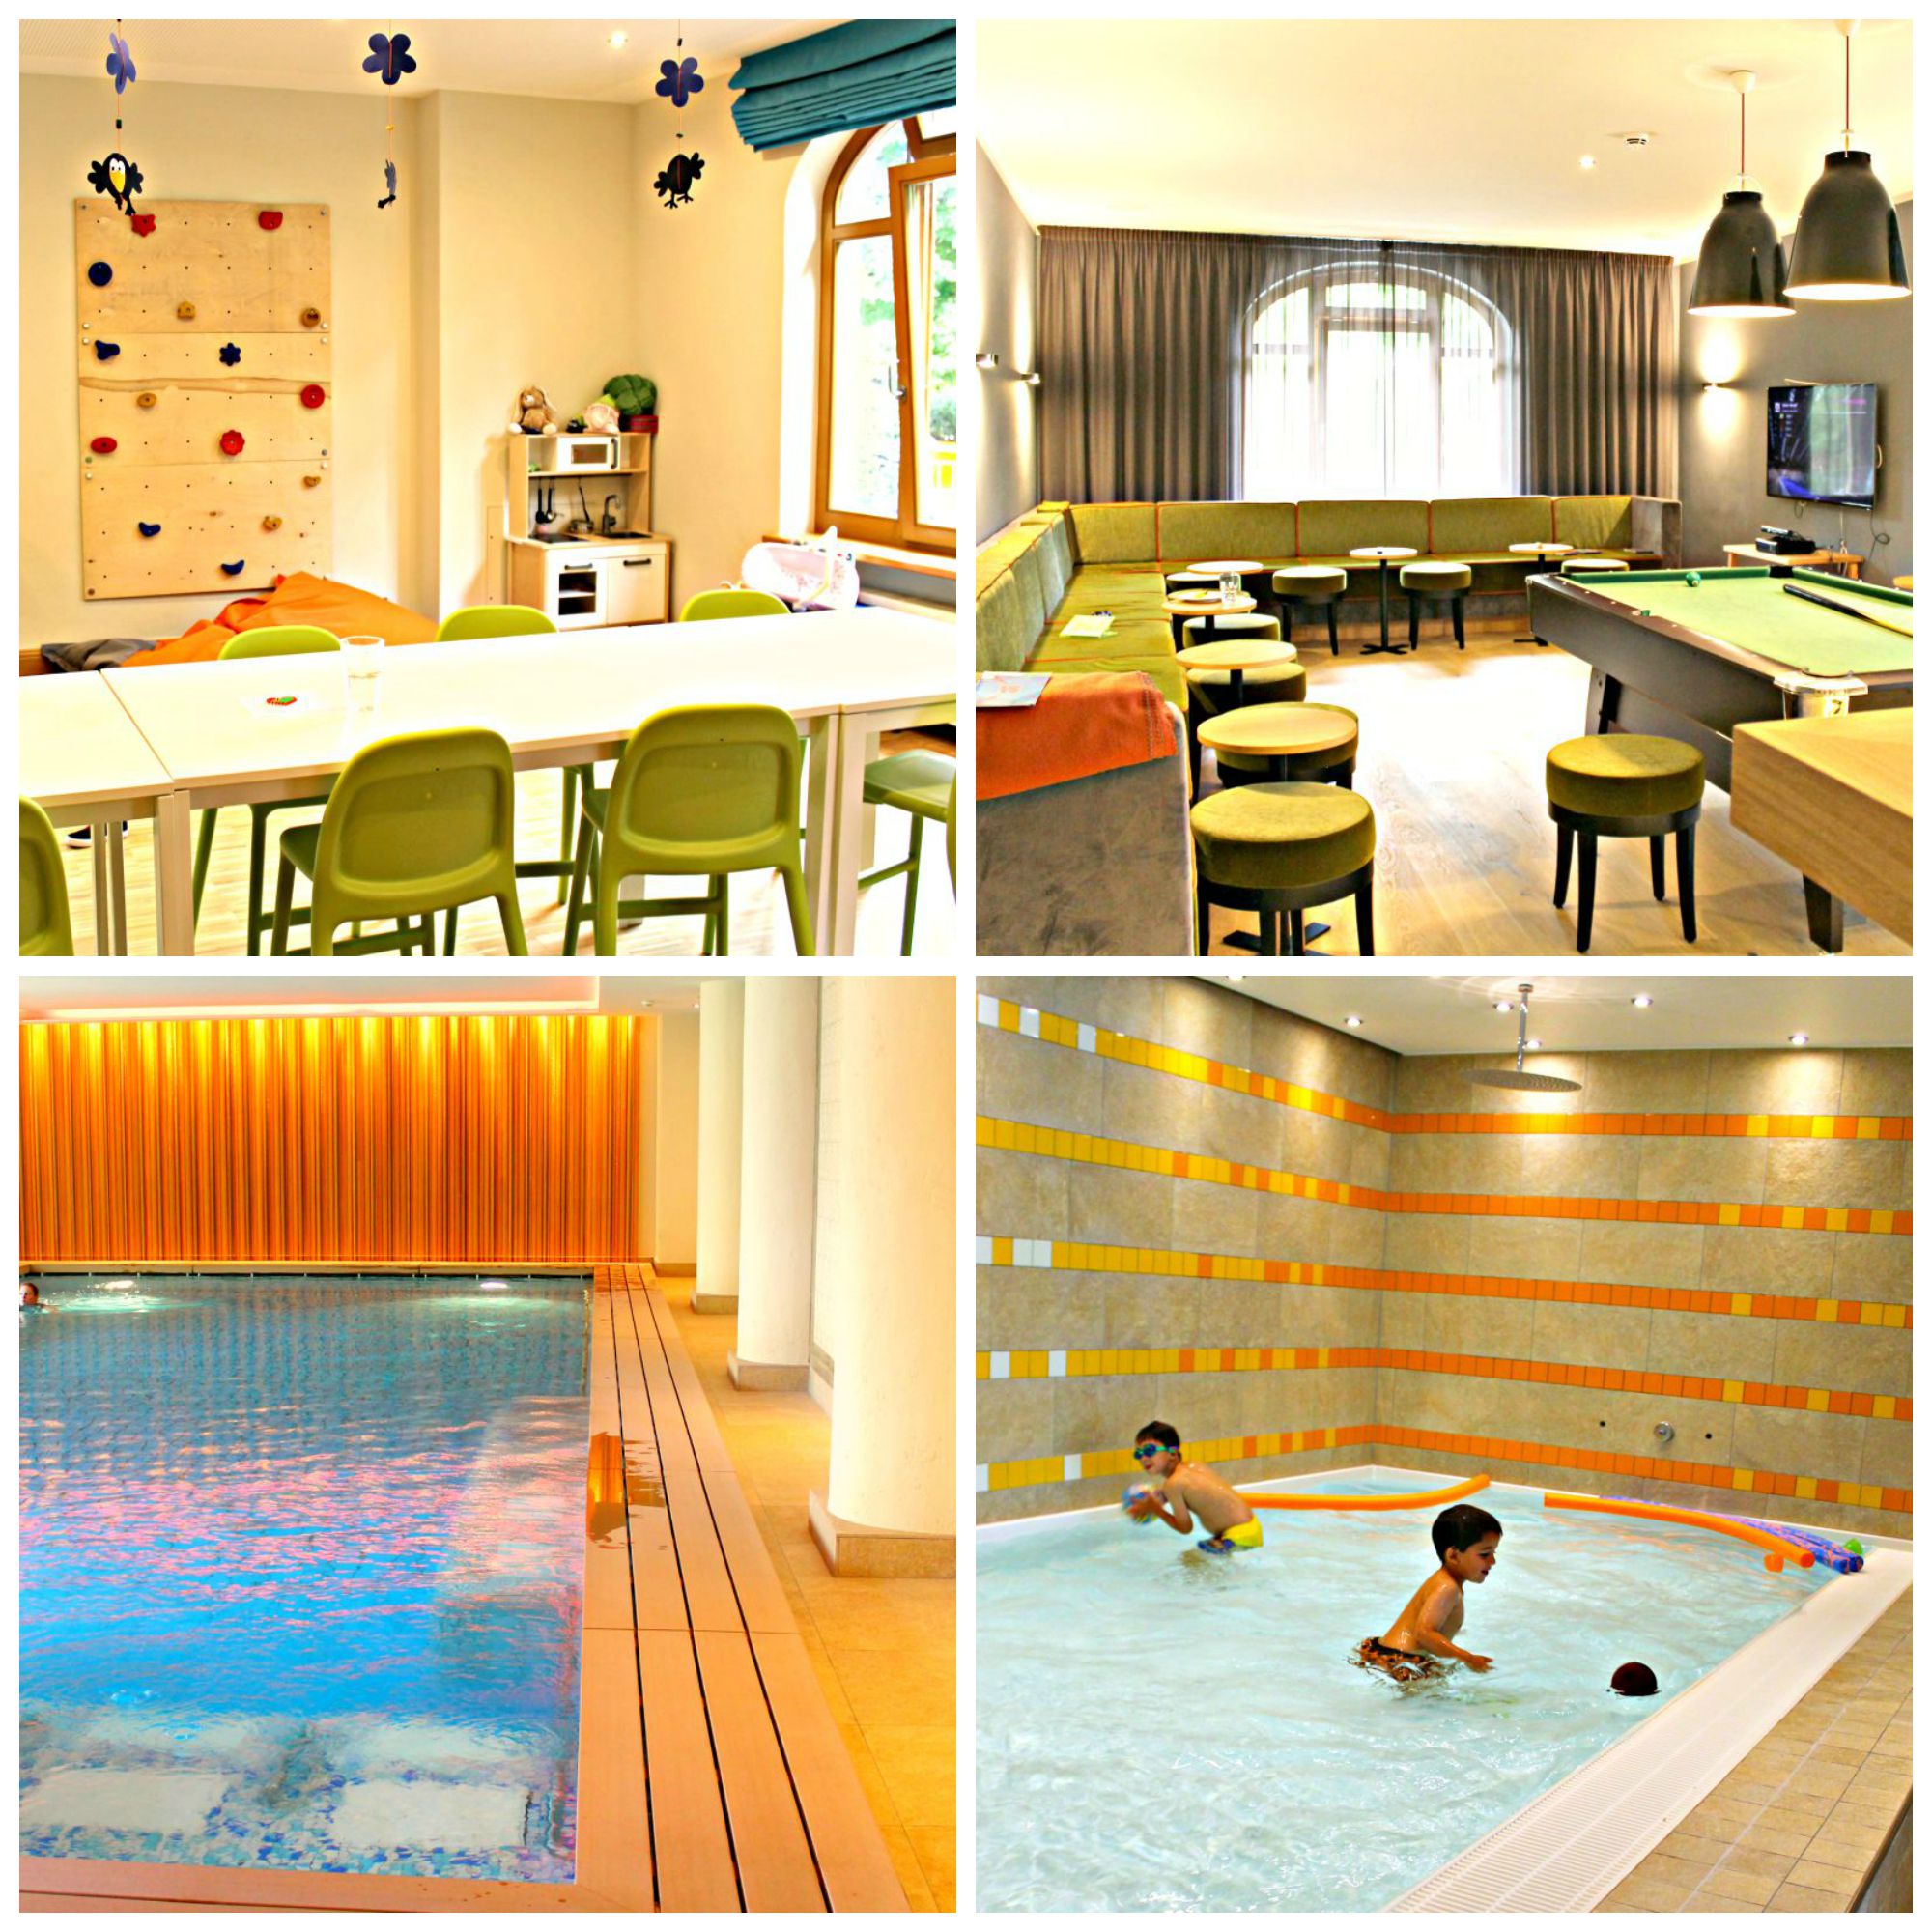 Between the kid's club and pools, kids have plenty of choices for activities.